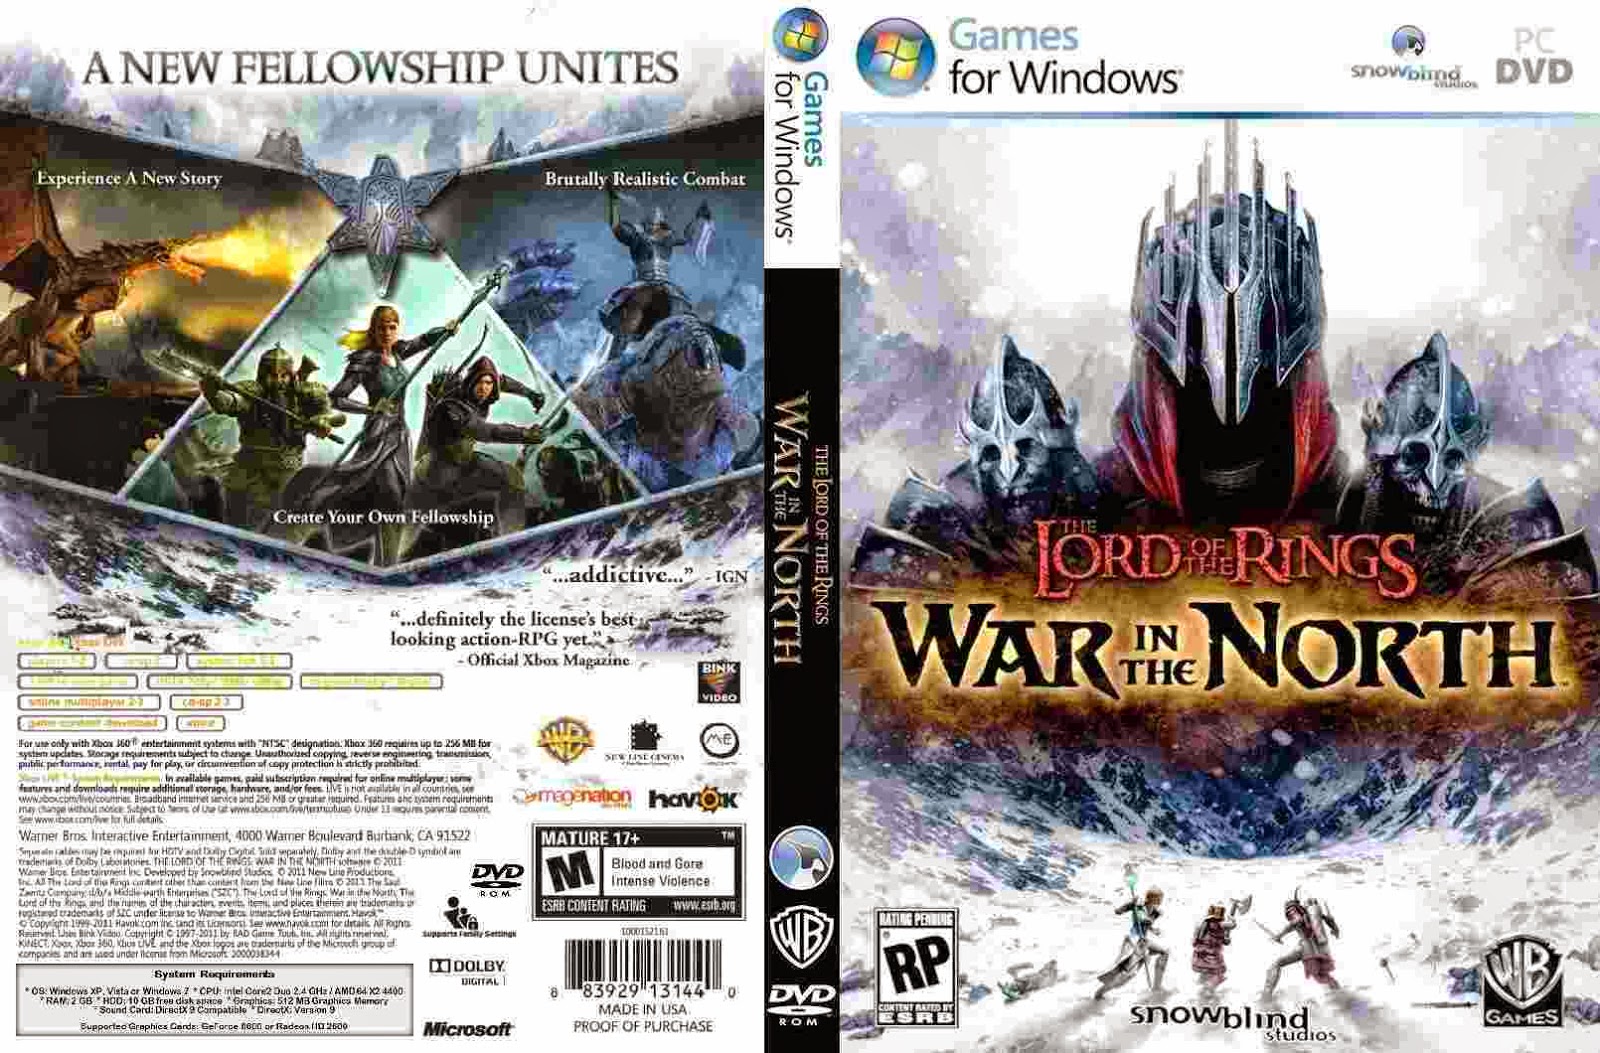 Lord of the rings war in the north no steam фото 36